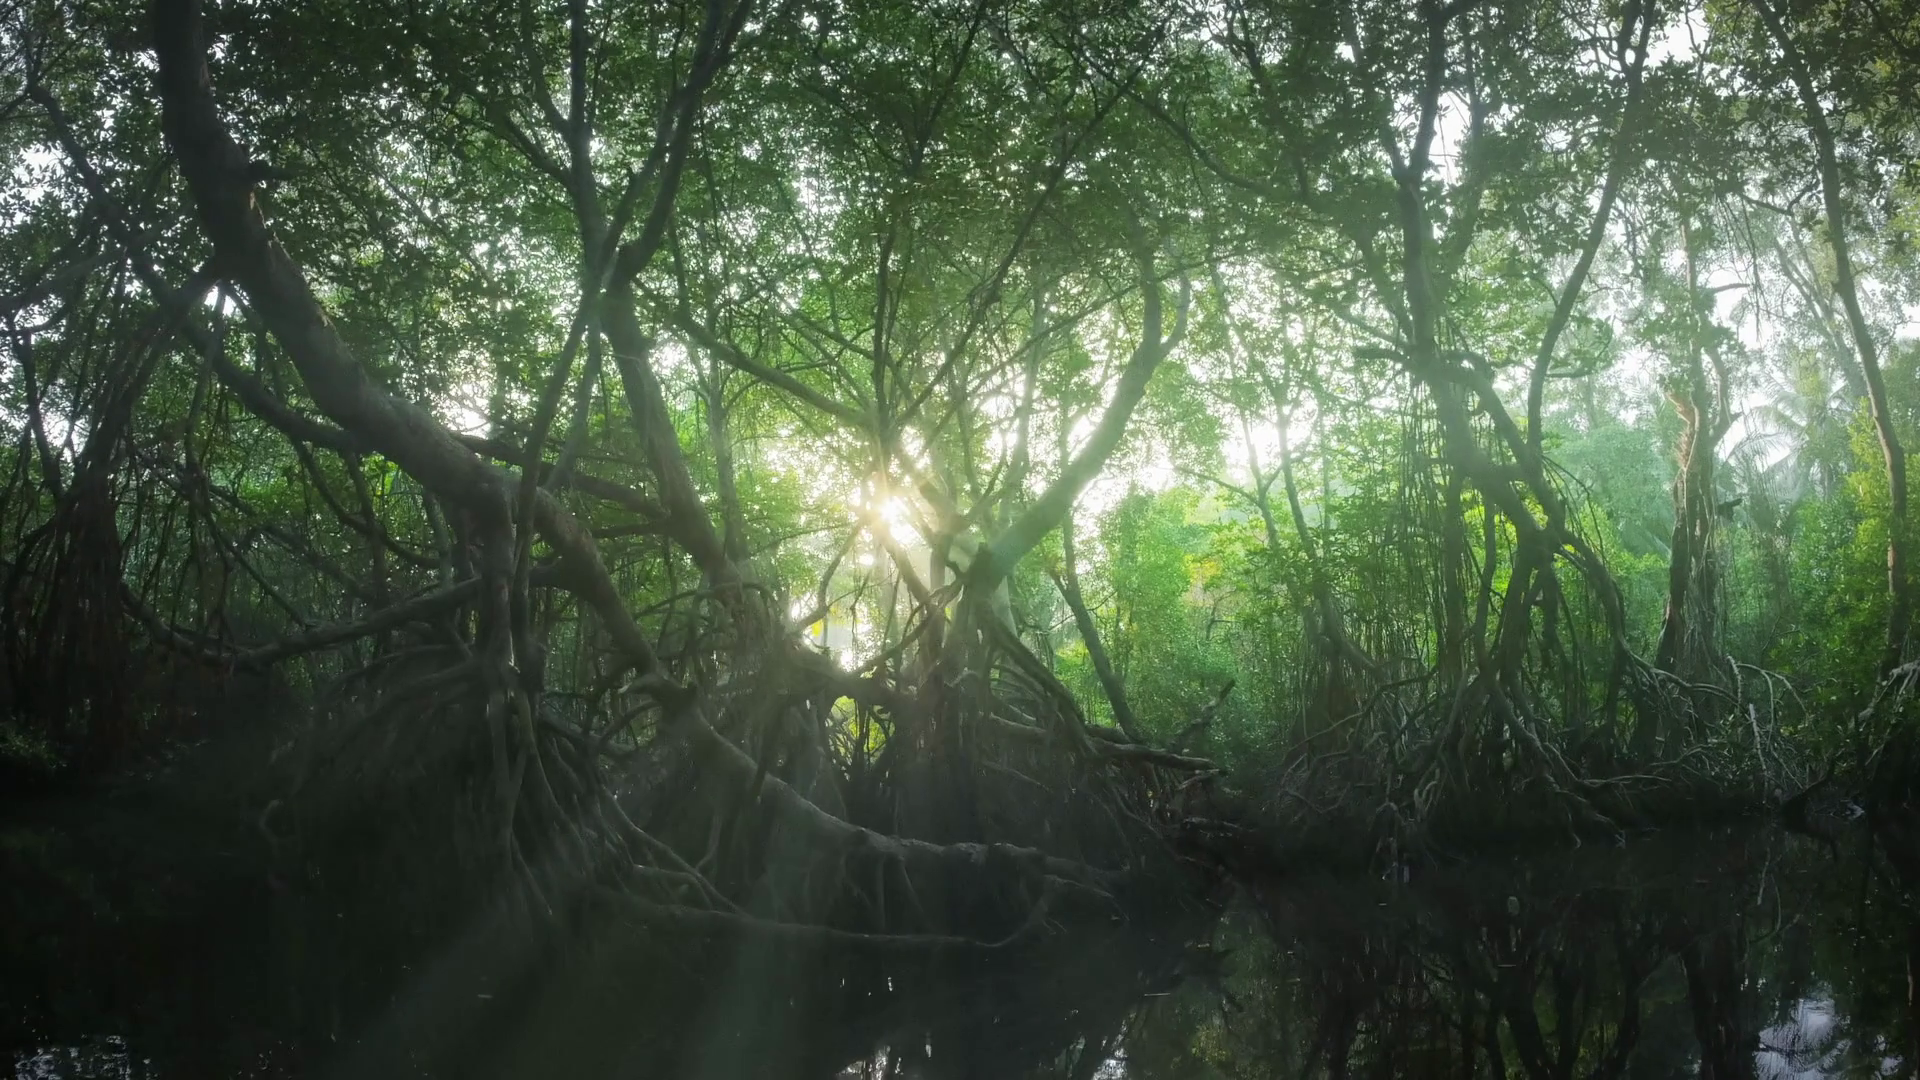 Fantastic and picturesque nature scene of mangrove forest with ...